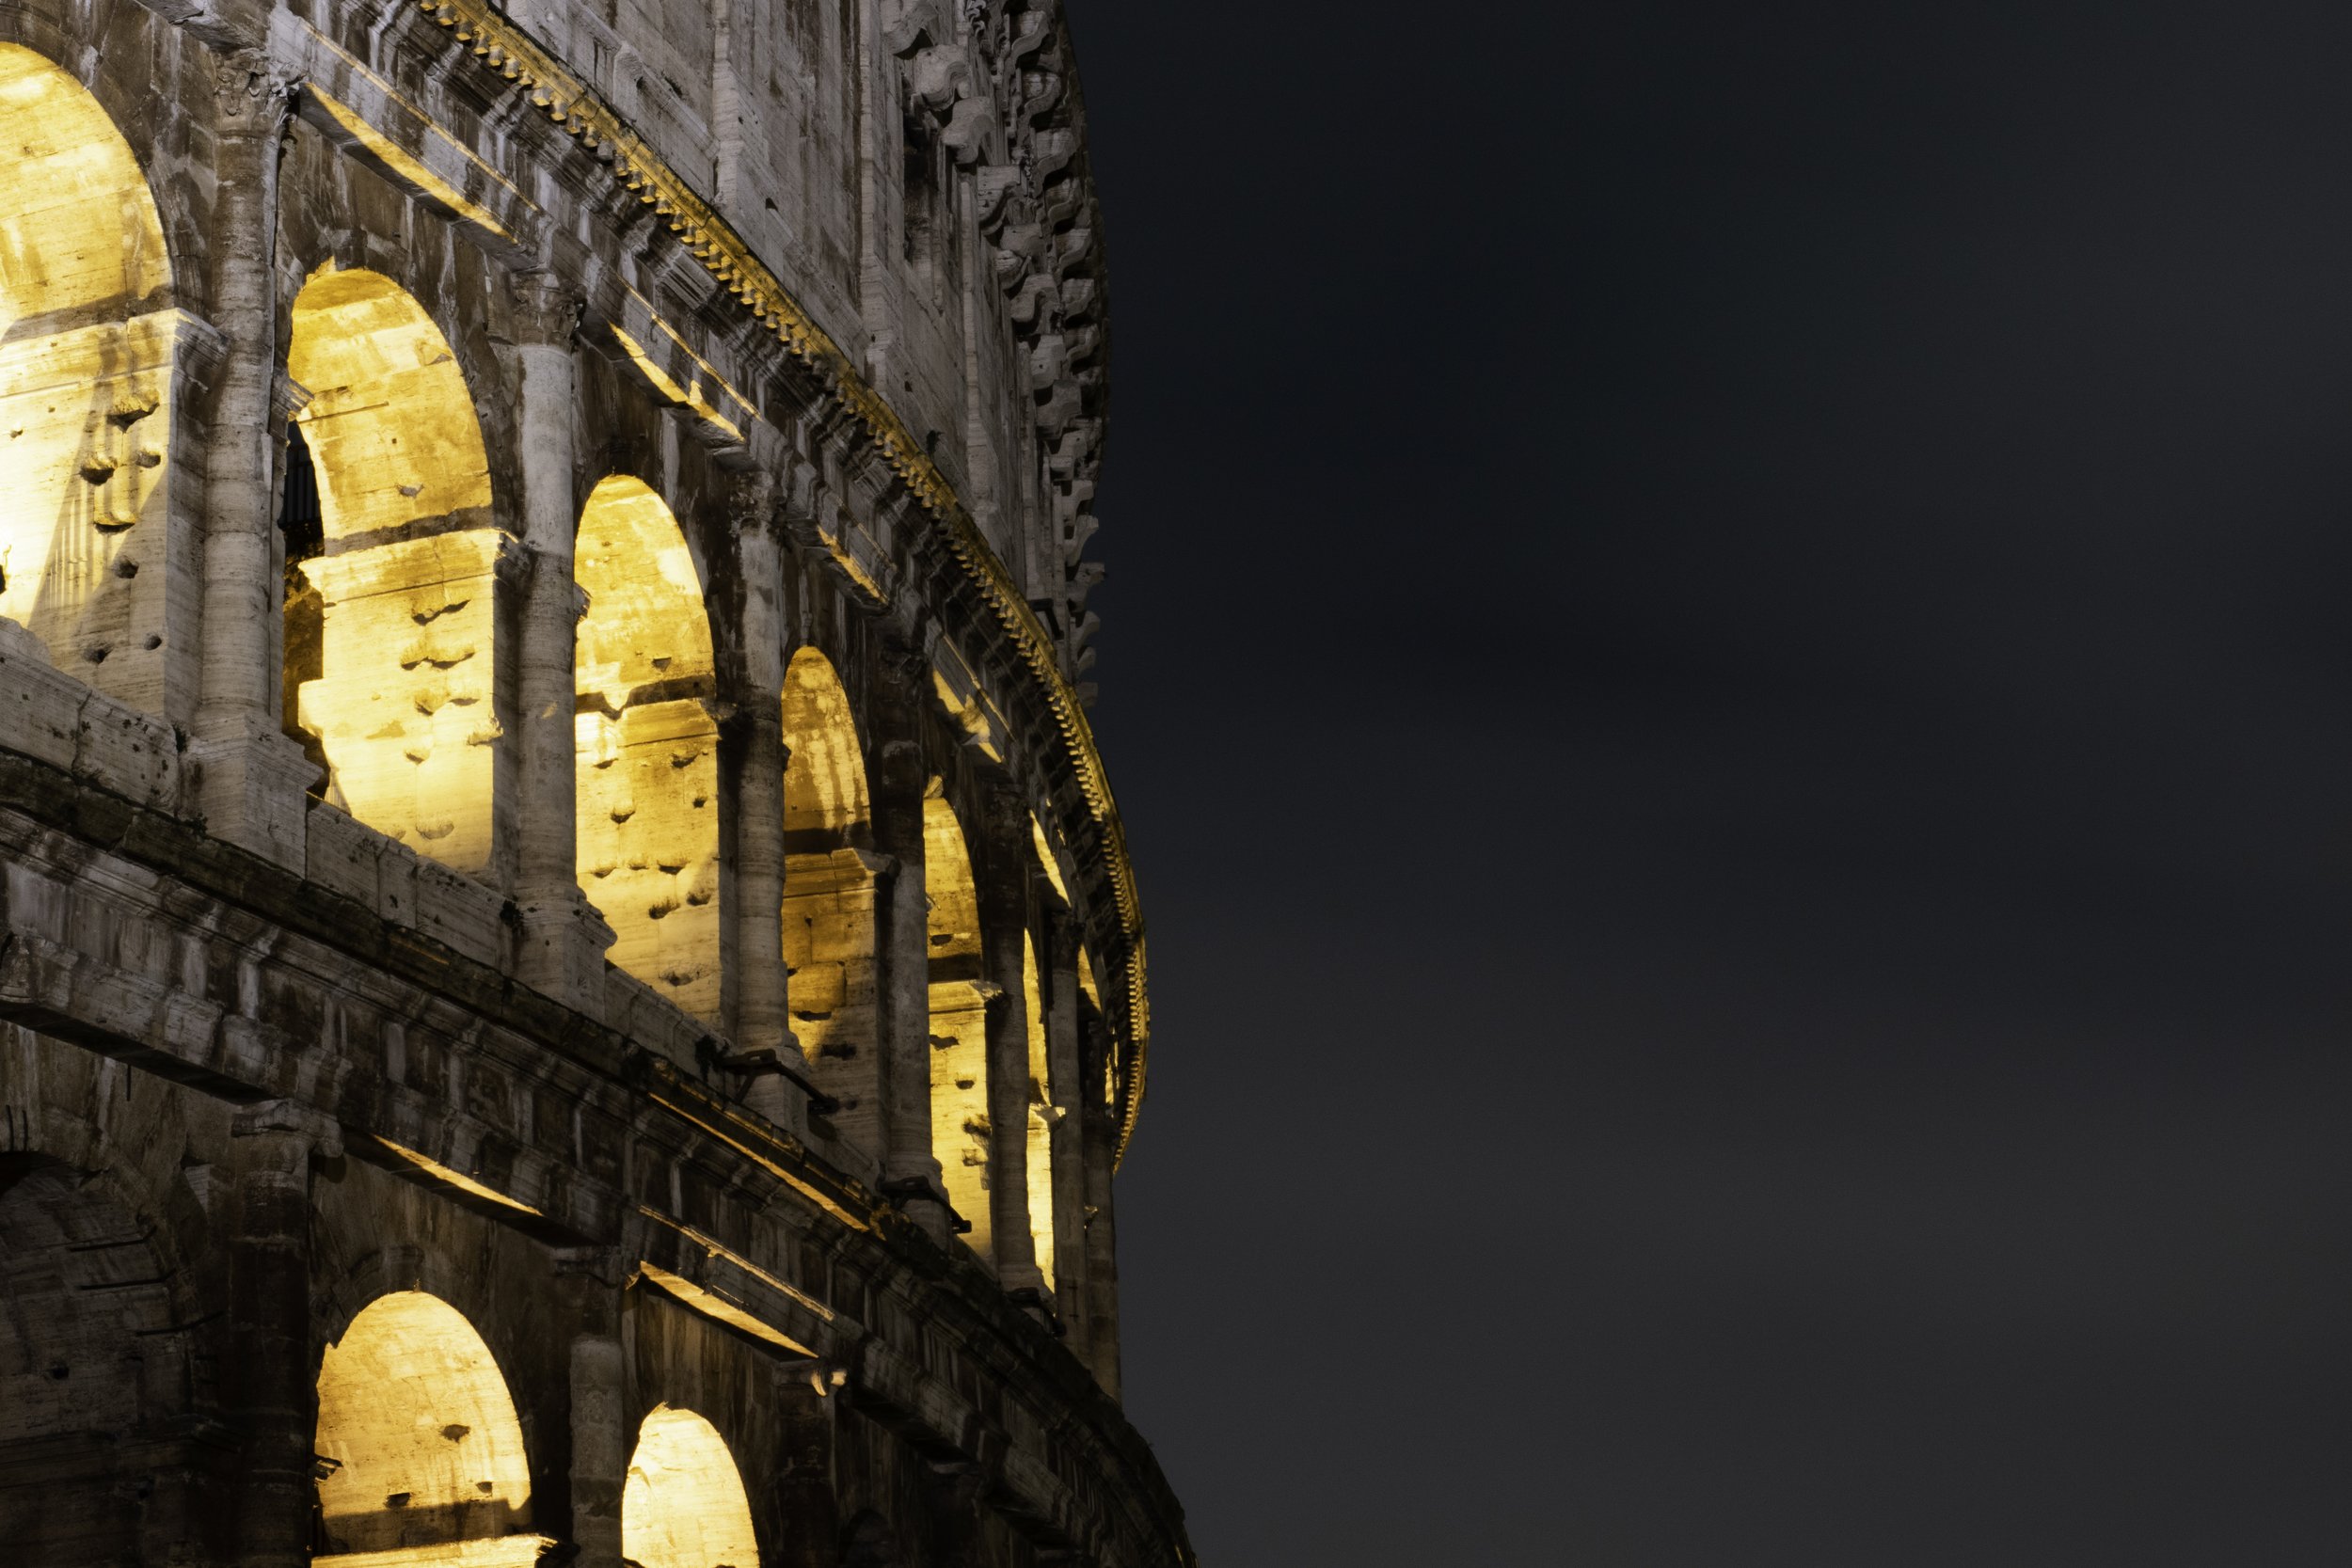 north vs south Italy - Night Picture of Colosseum in Rome